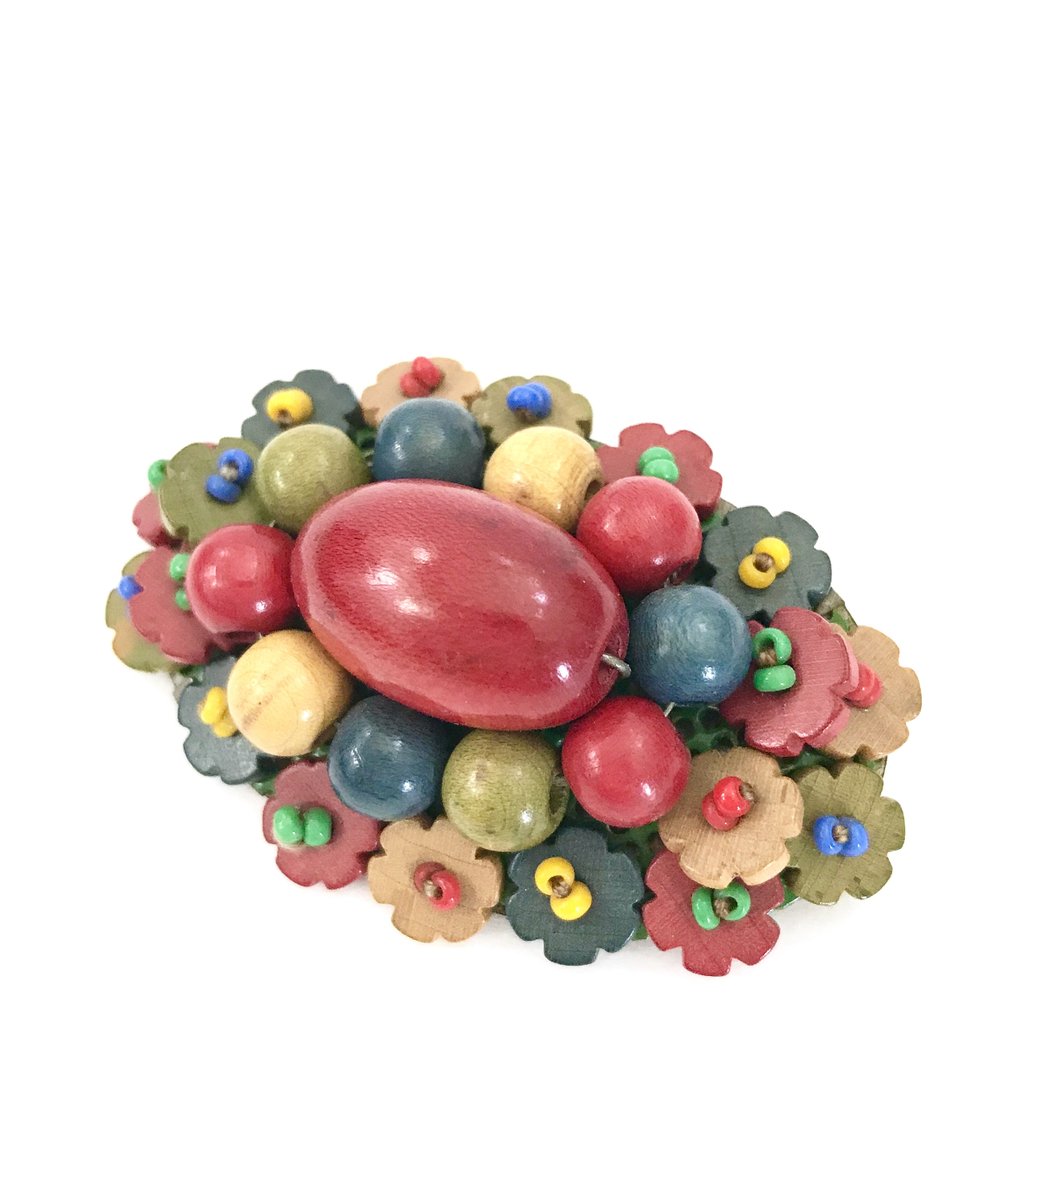 Multi color wooden bead brooch #largeoval #domedshape #clusterpin #midcentury #1930s1940s #woodenflowerbeads #colorfulpin #dimensional #giftforher etsy.me/2FrZxBO please follow for shop updates On Sale Now